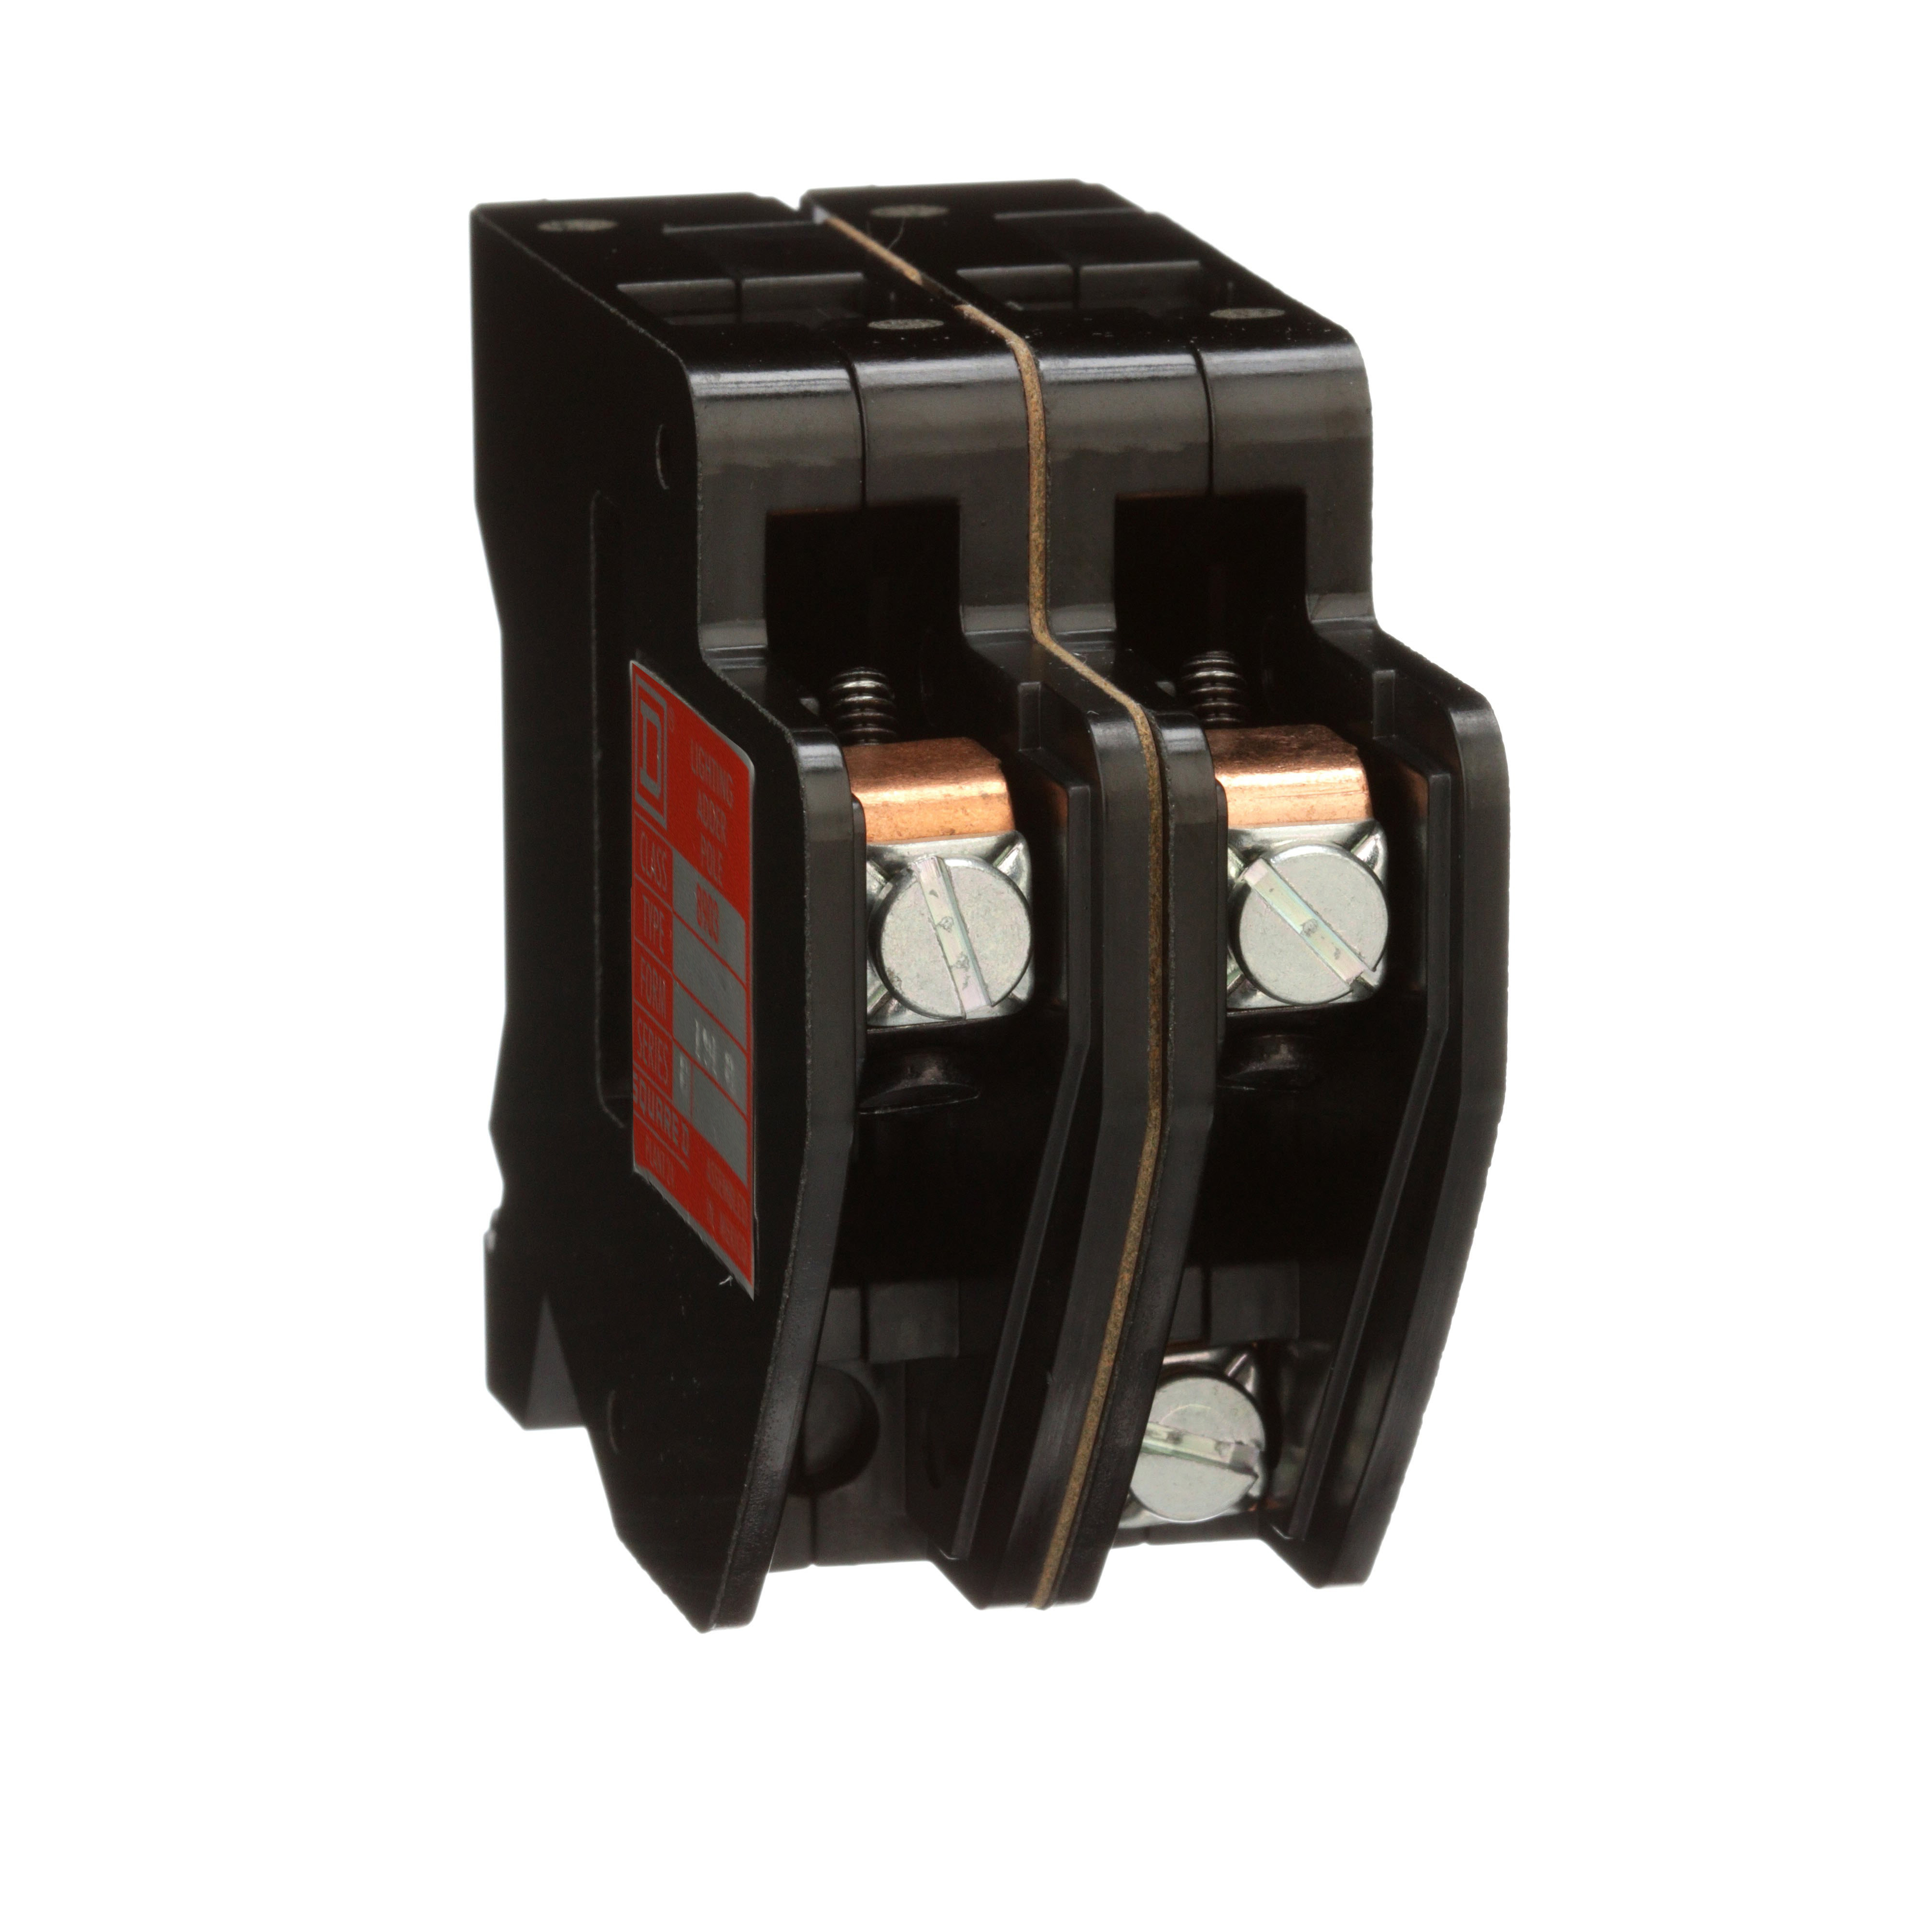 Contactor, Type L, multipole lighting, power pole, 30A, 2 pole, 2 normally open contacts, 600V, left side mount